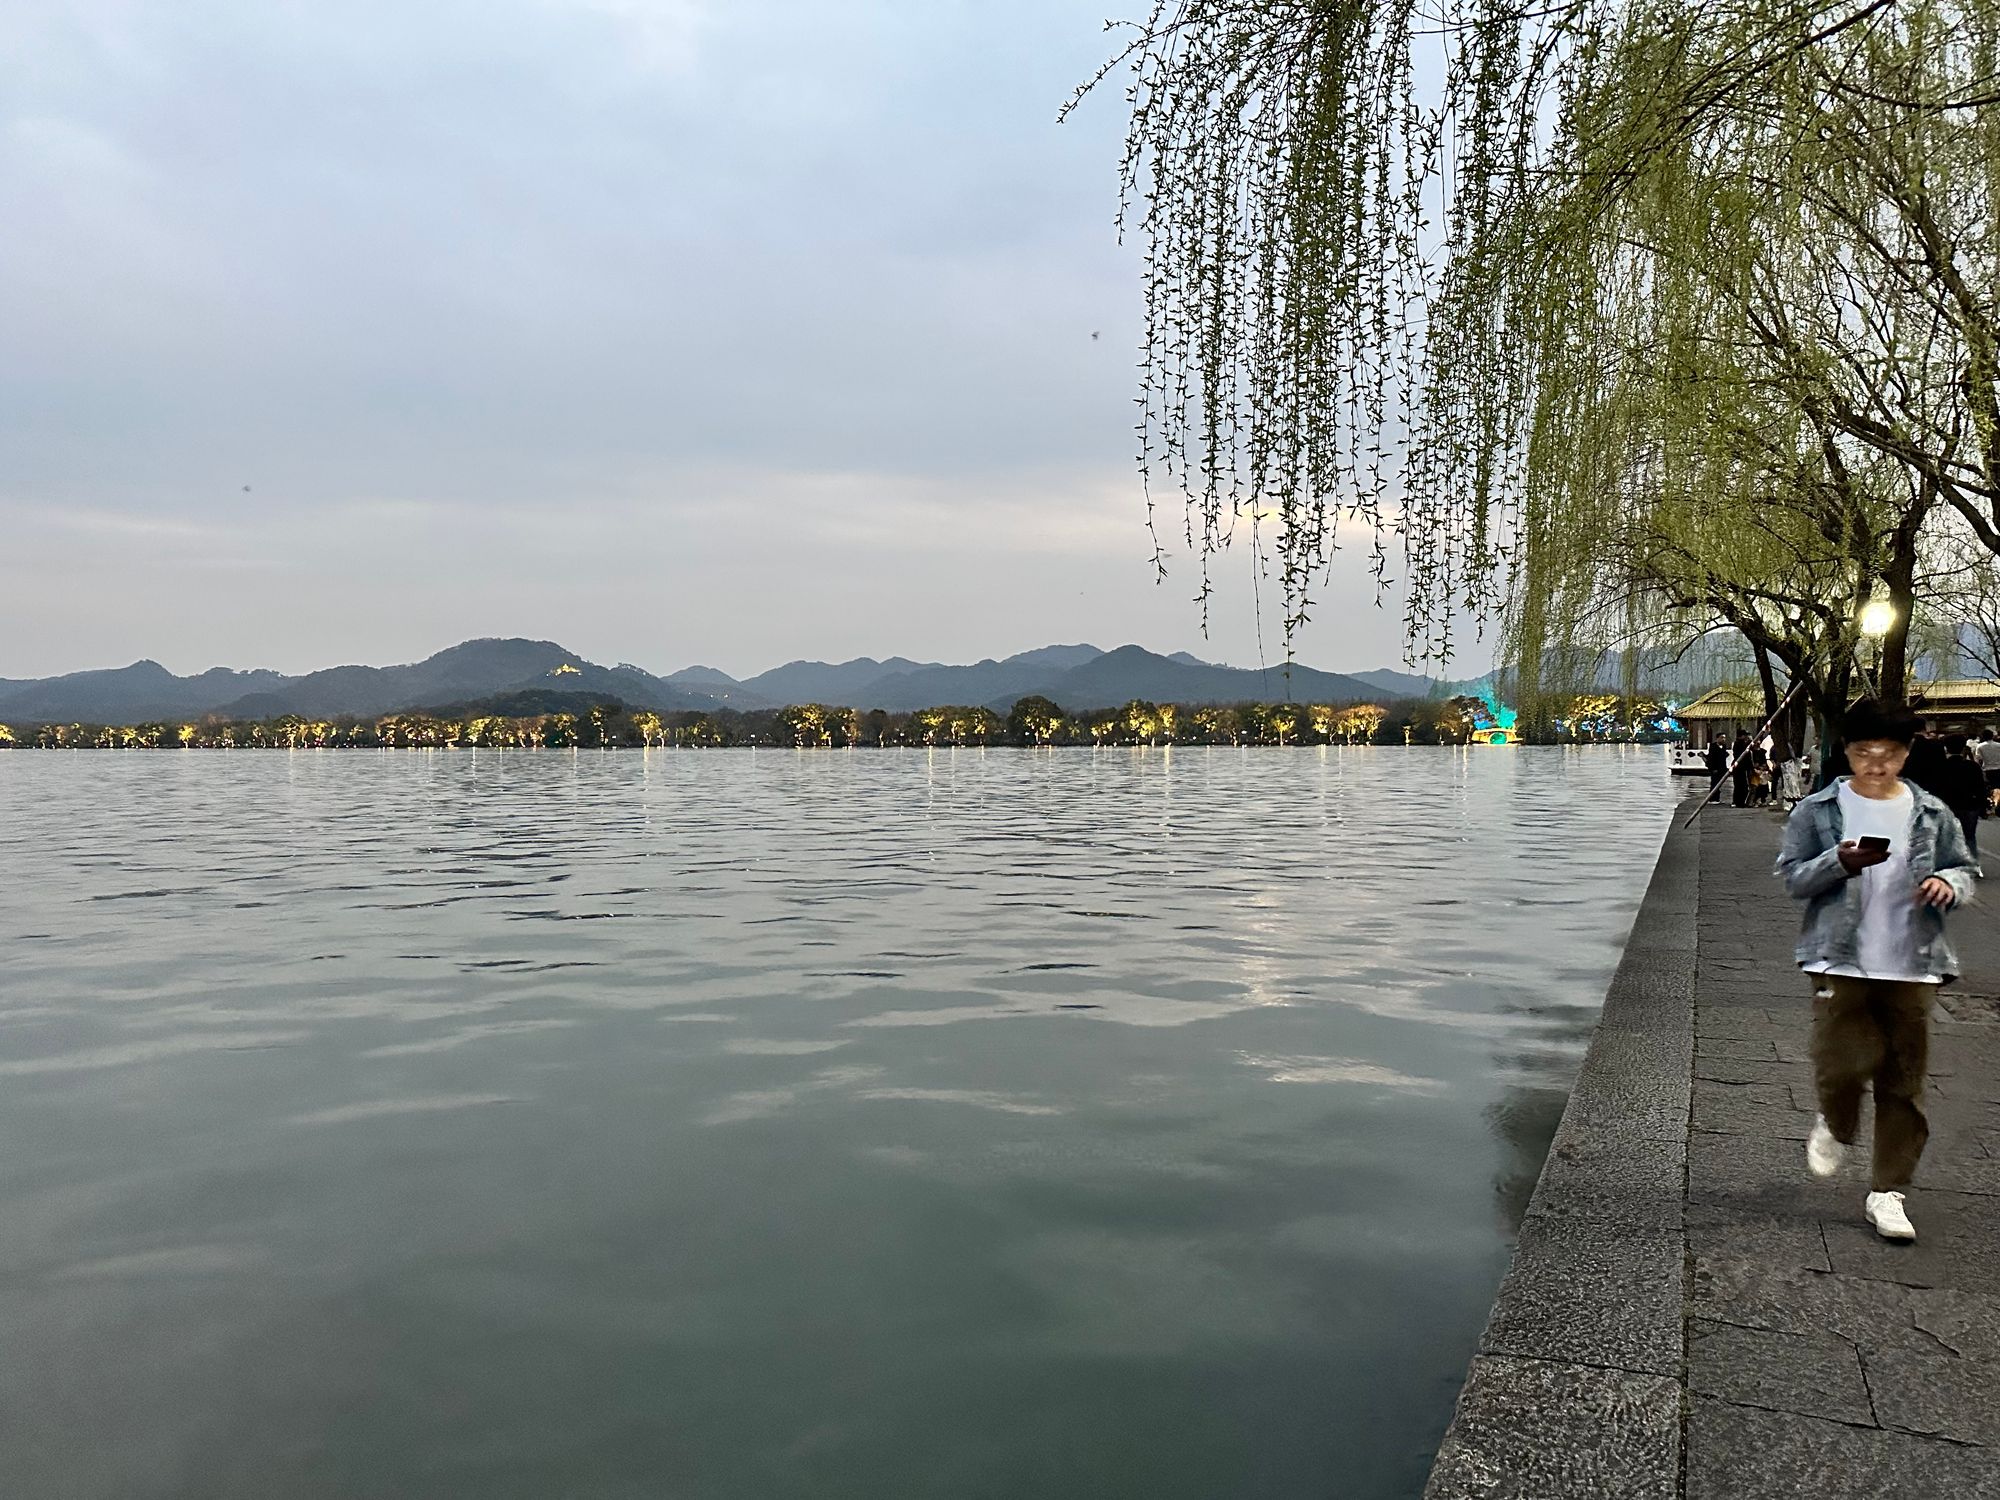 A person walks alongside the West Lake, focusing on his phone.